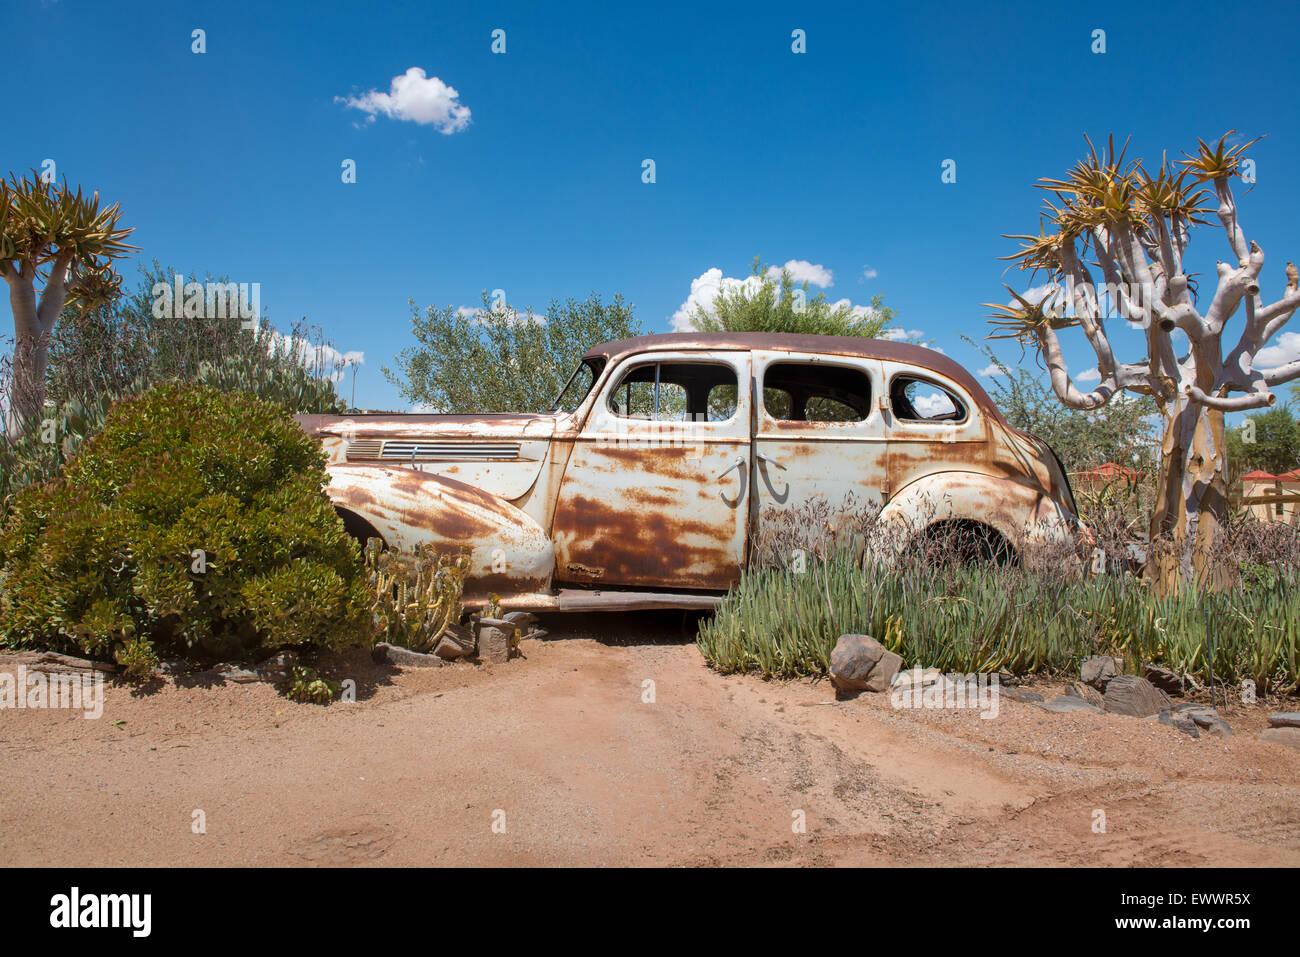 Canon Roadhouse, Namibia, Africa - Abandoned, rusted car in the desert Stock Photo